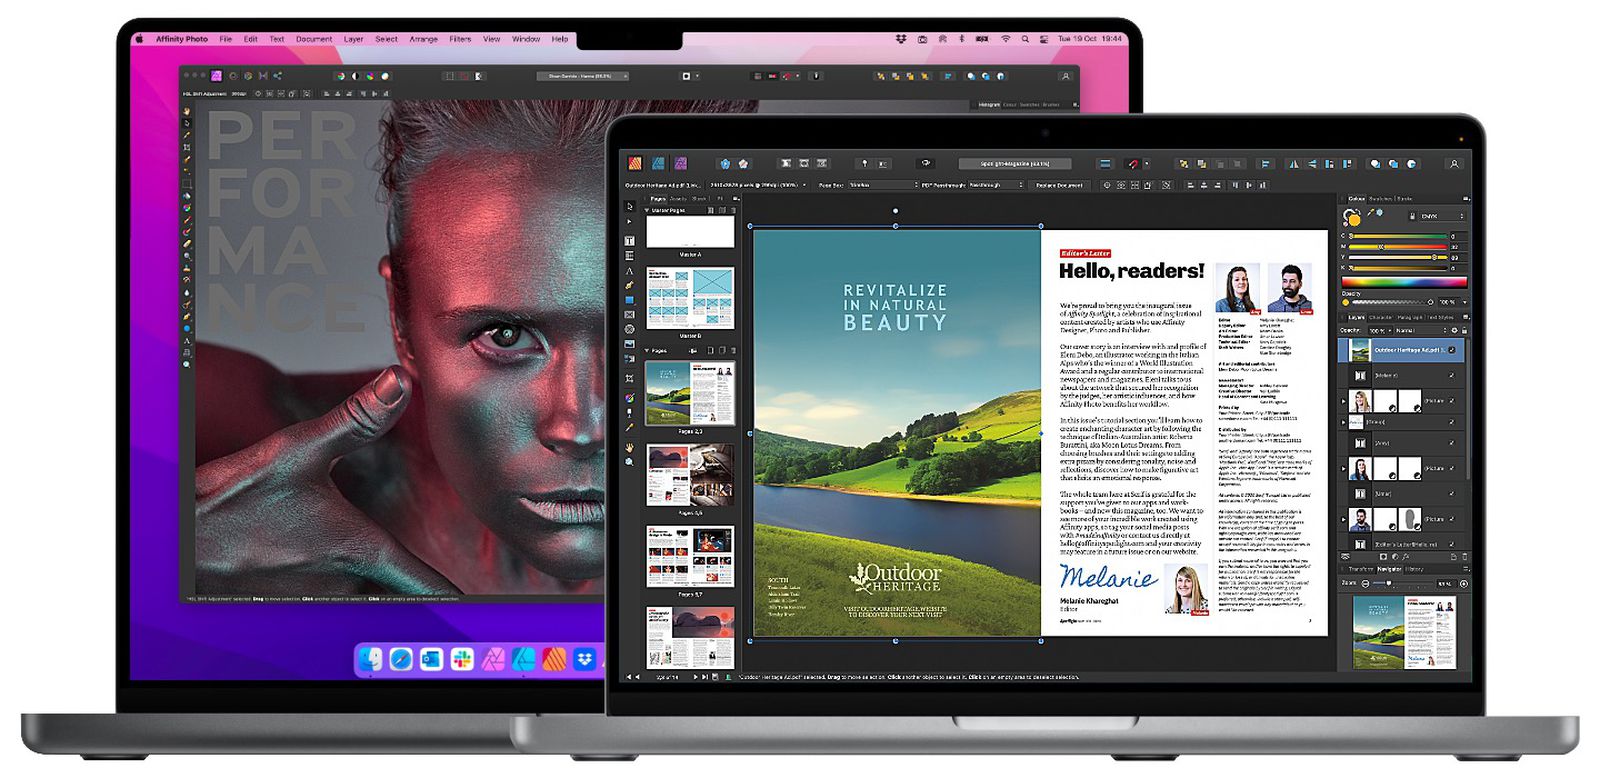 Affinity Creative Apps 1.10.3 Update Brings Monterey Support and 'Stunning' Performance Optimizations on New MacBook Pros